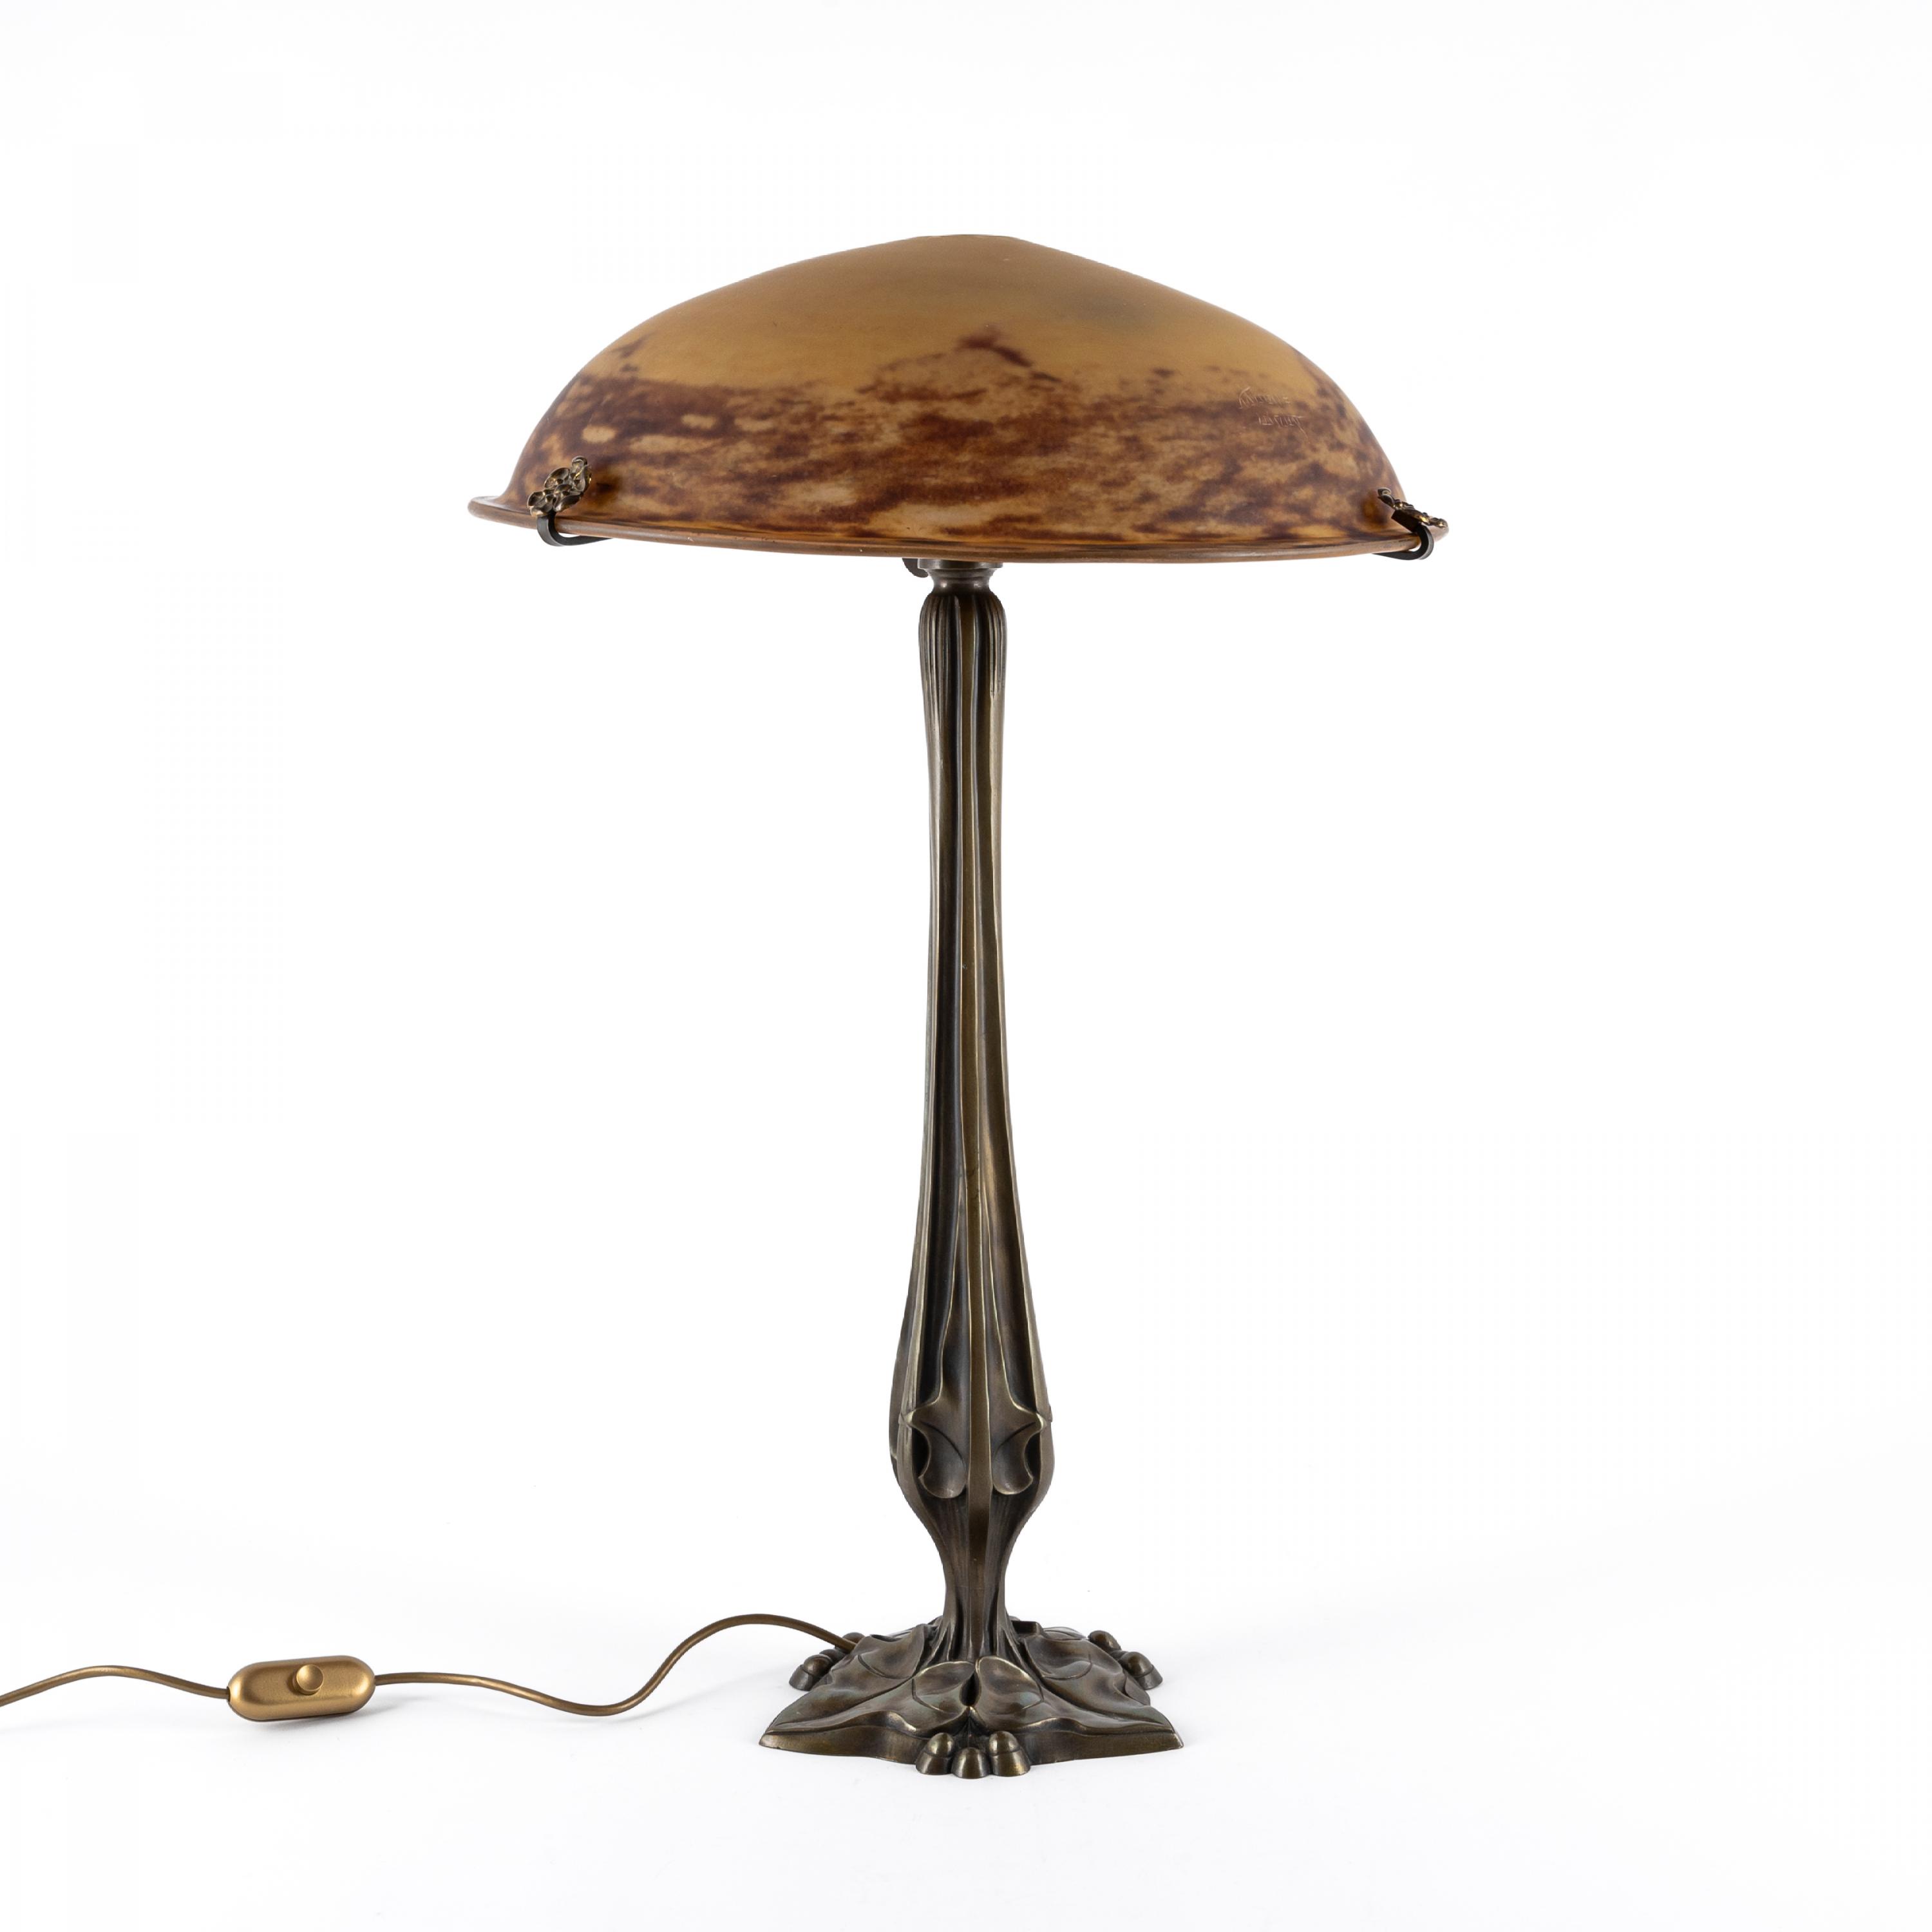 LARGE GLASS TABLE LAMP WITH METAL FOOT